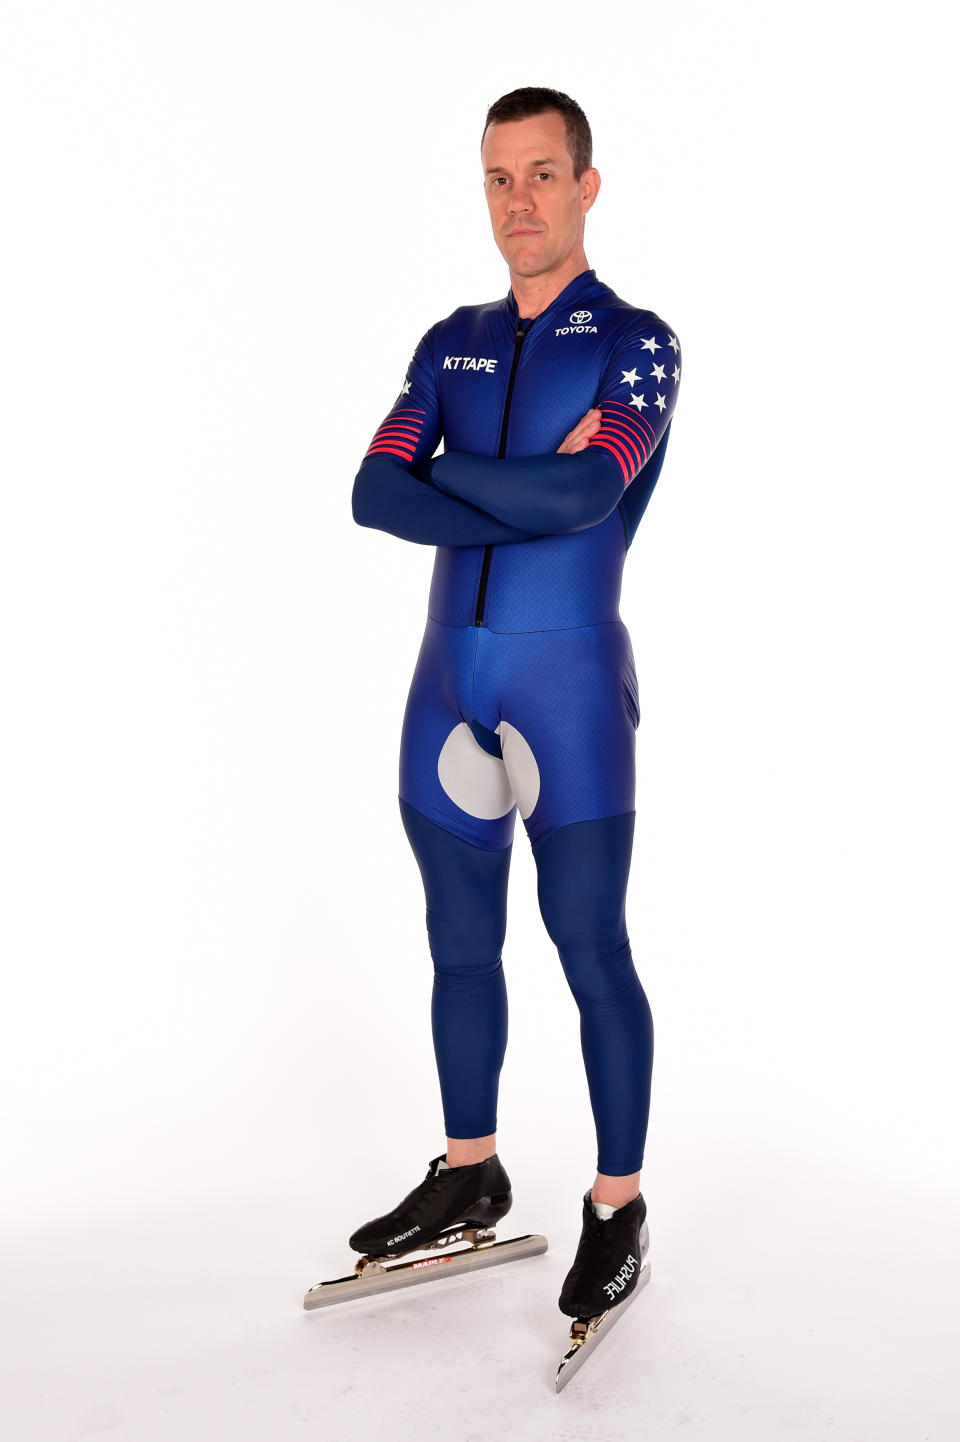 WEST HOLLYWOOD, CA – APRIL 27: Speed skater K.C. Boutiette poses for a portrait during the Team USA PyeongChang 2018 Winter Olympics photo sessions. (Getty Images)